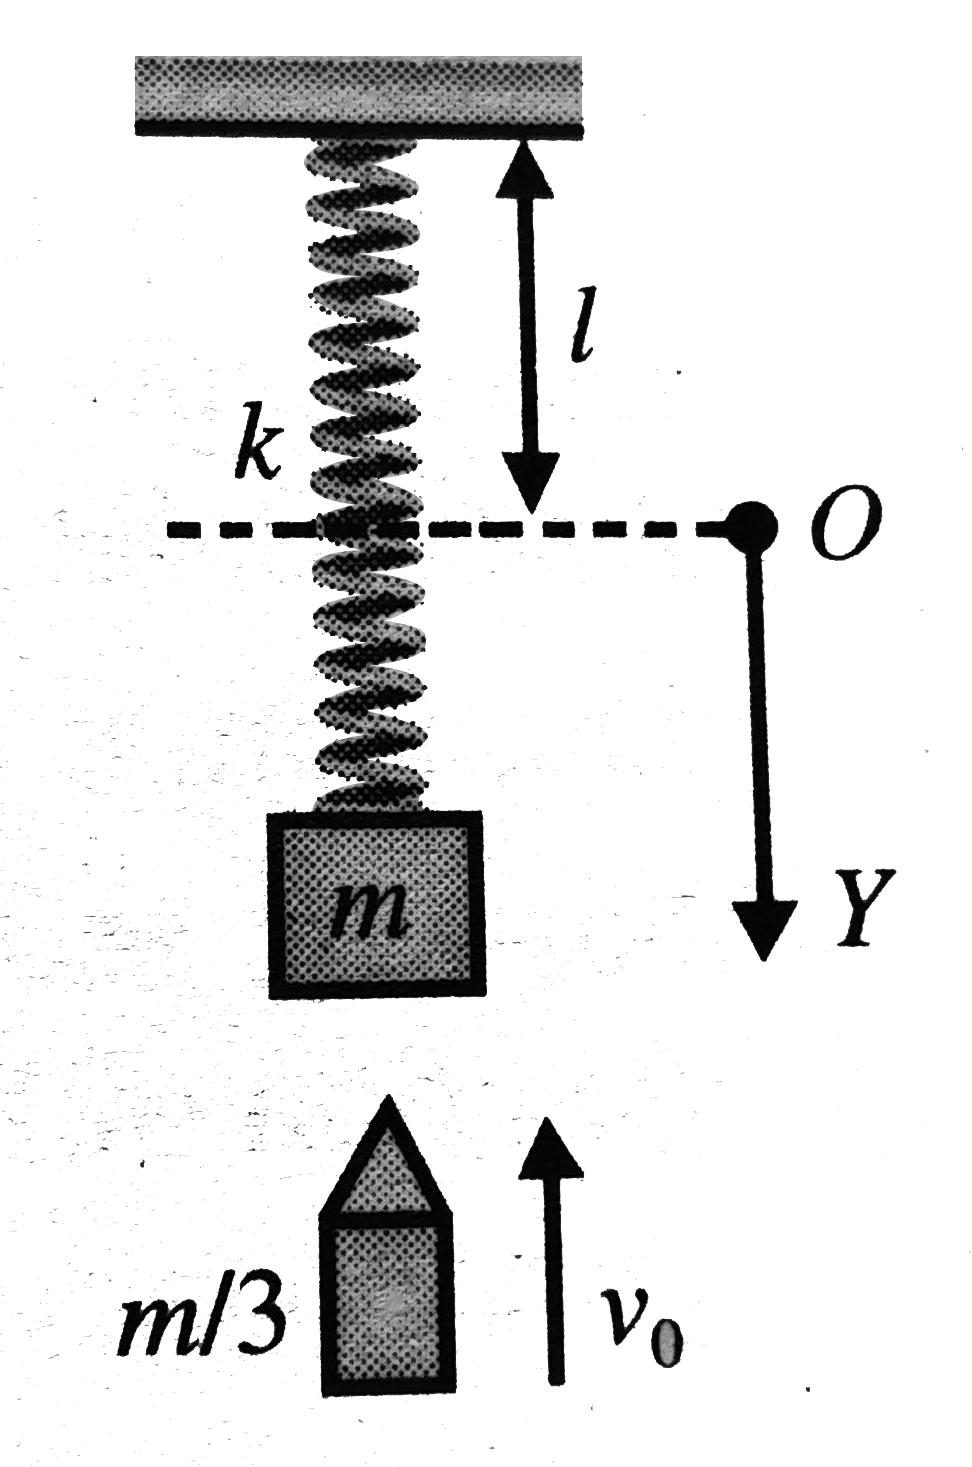 A block of mass m is suspended from one end of a light spring as shown. The origin O is considered at distance equal to natural length of the spring from the ceiling and vertical downwards direction as positive y-axis. When the system is in equilibrium a bullet of mass (m)/(3) moving in vertical up wards direction with velocity v0 strikes the block and embeds into it. As a result, the block (with bullet embedded into it) moves up and start oscillating. Based on the given information, answer the following question:   Q. The time taken by the block bullet system to move from y=(mg)/(k) (initial equilibrium position) to y=0 (natural length of spring) is (A represents the amplitude of motion)